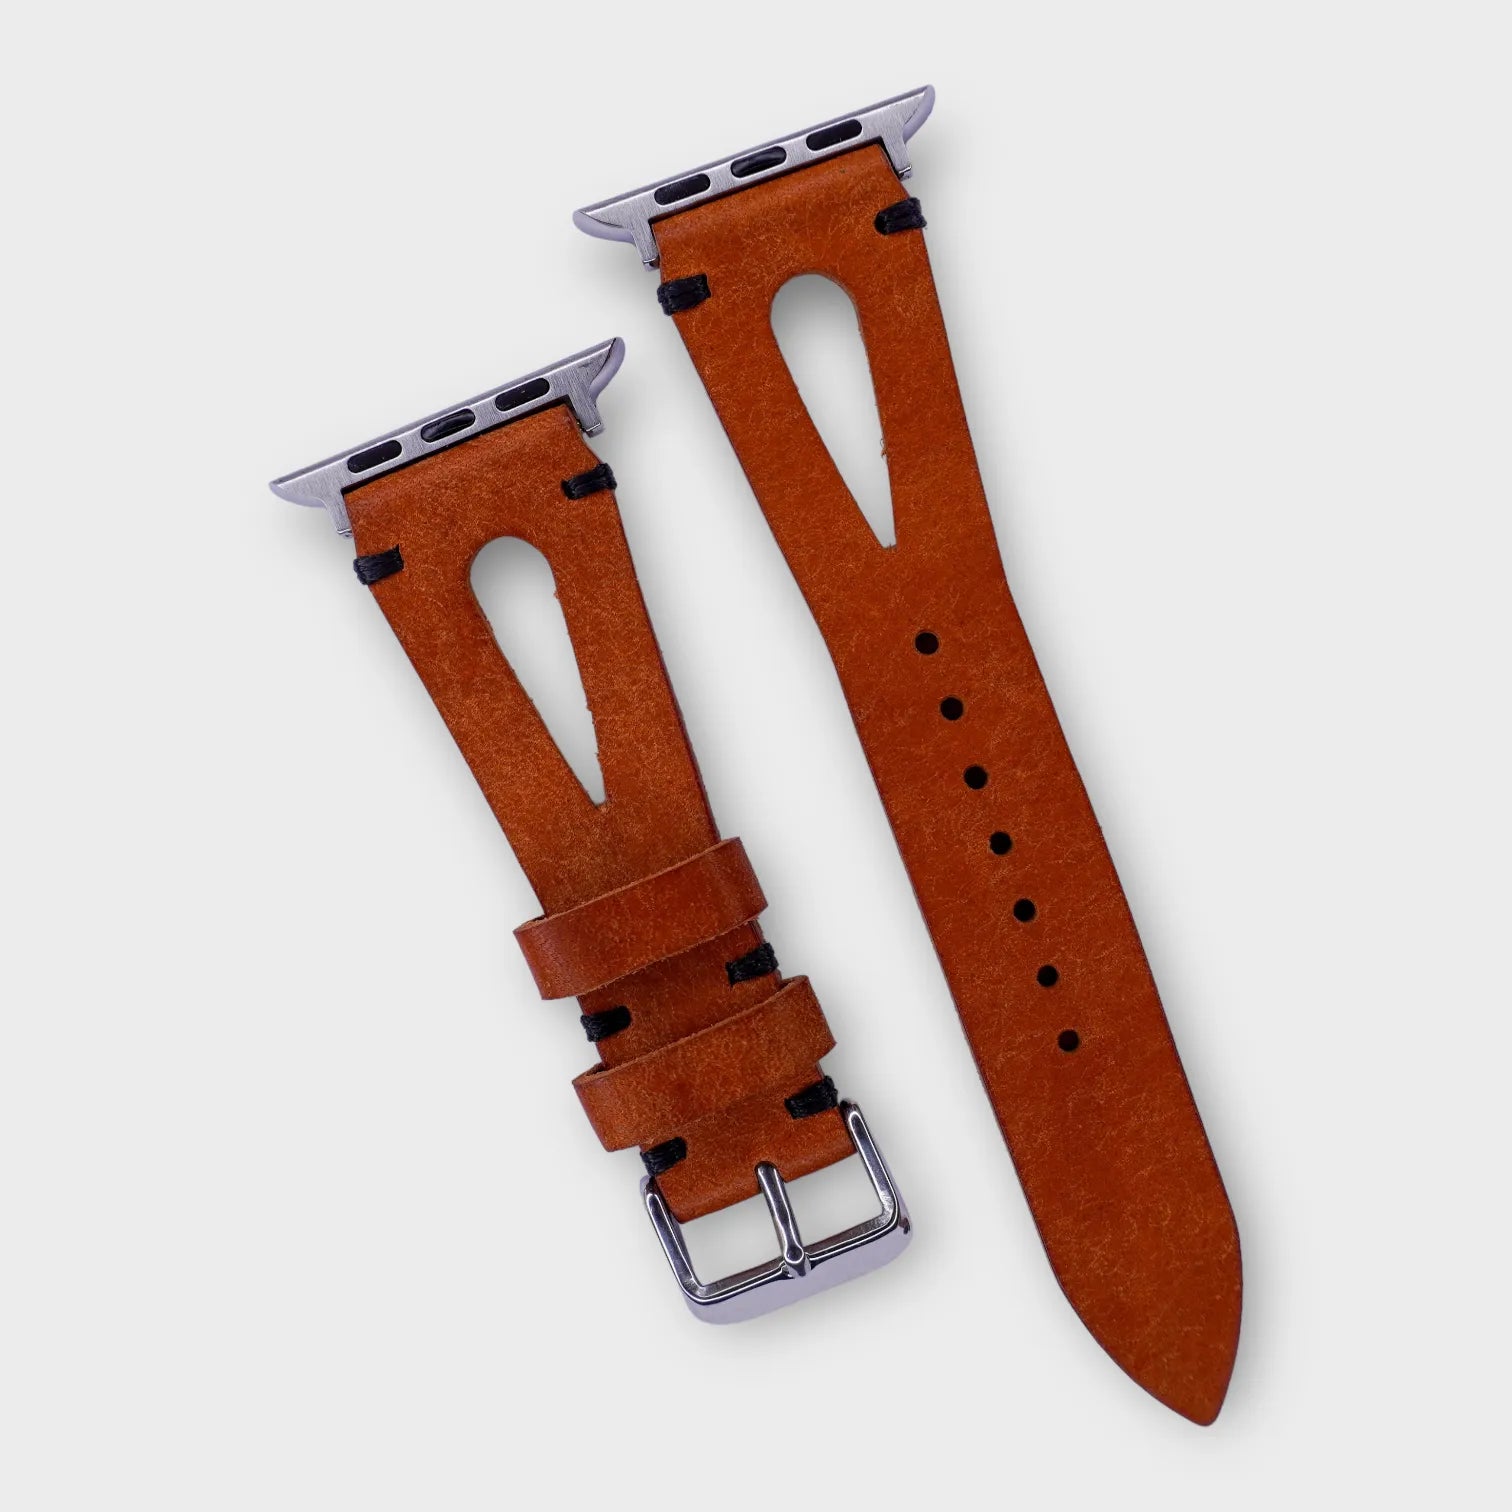 Artisan-crafted leather watch bands in light brown Pueblo leather for Apple Watch.